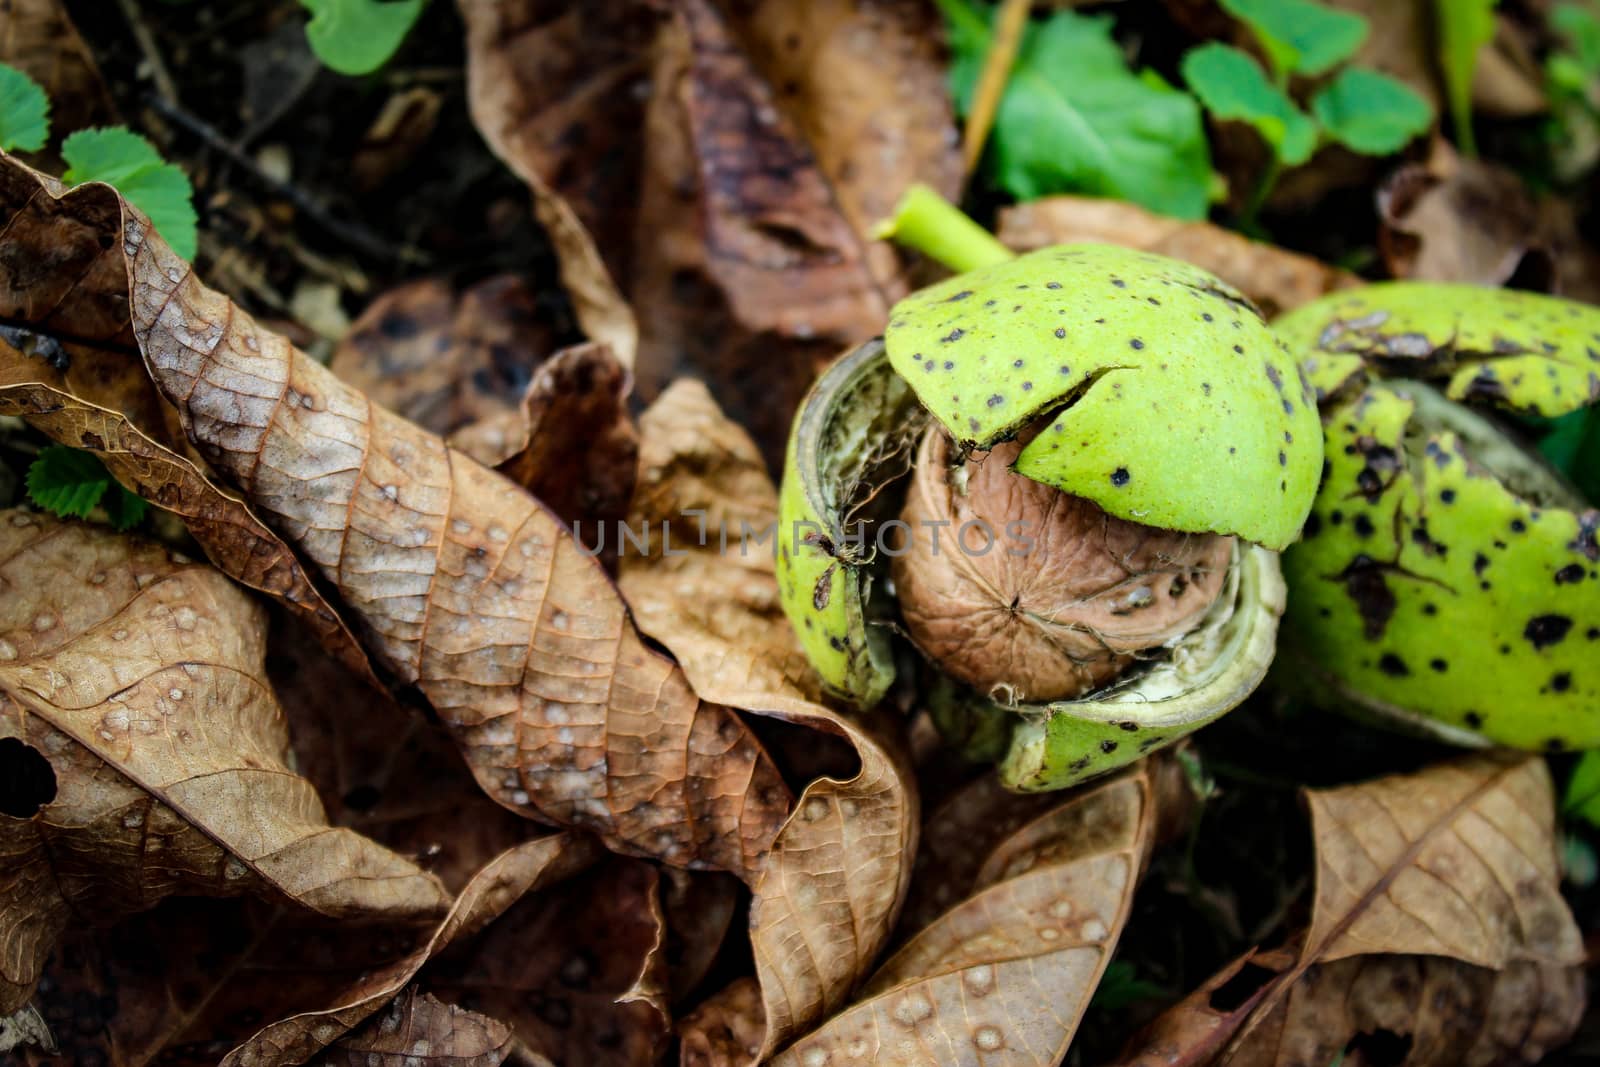 There is a walnut fruit on the grass and dry walnut leaves. The walnut fruit is seen inside the cracked green shell. Zavidovici, Bosnia and Herzegovina.